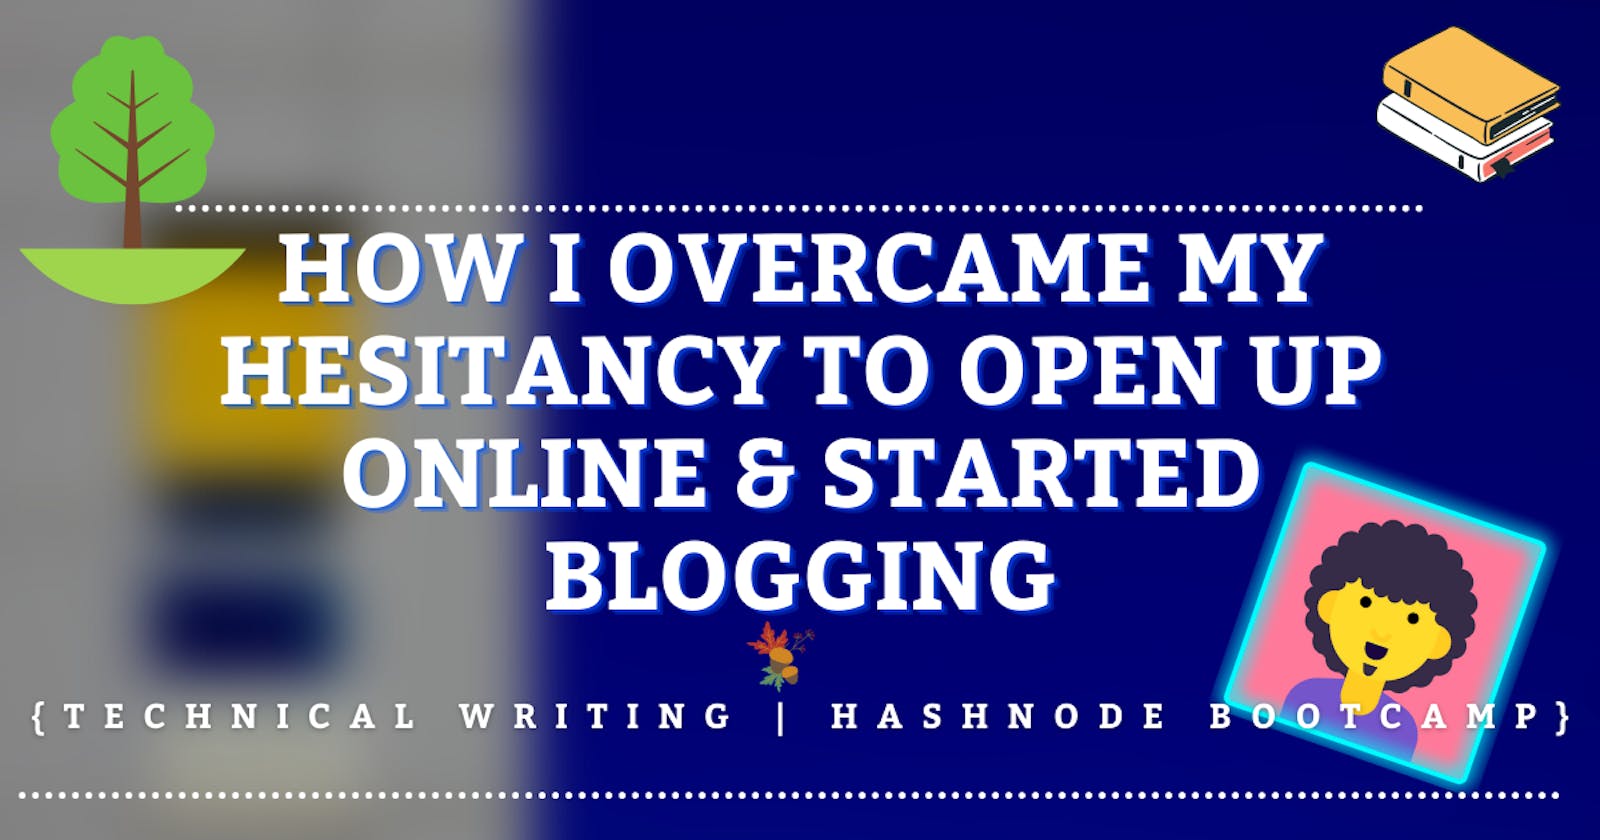 How i overcame my hesitancy to open up online & started blogging